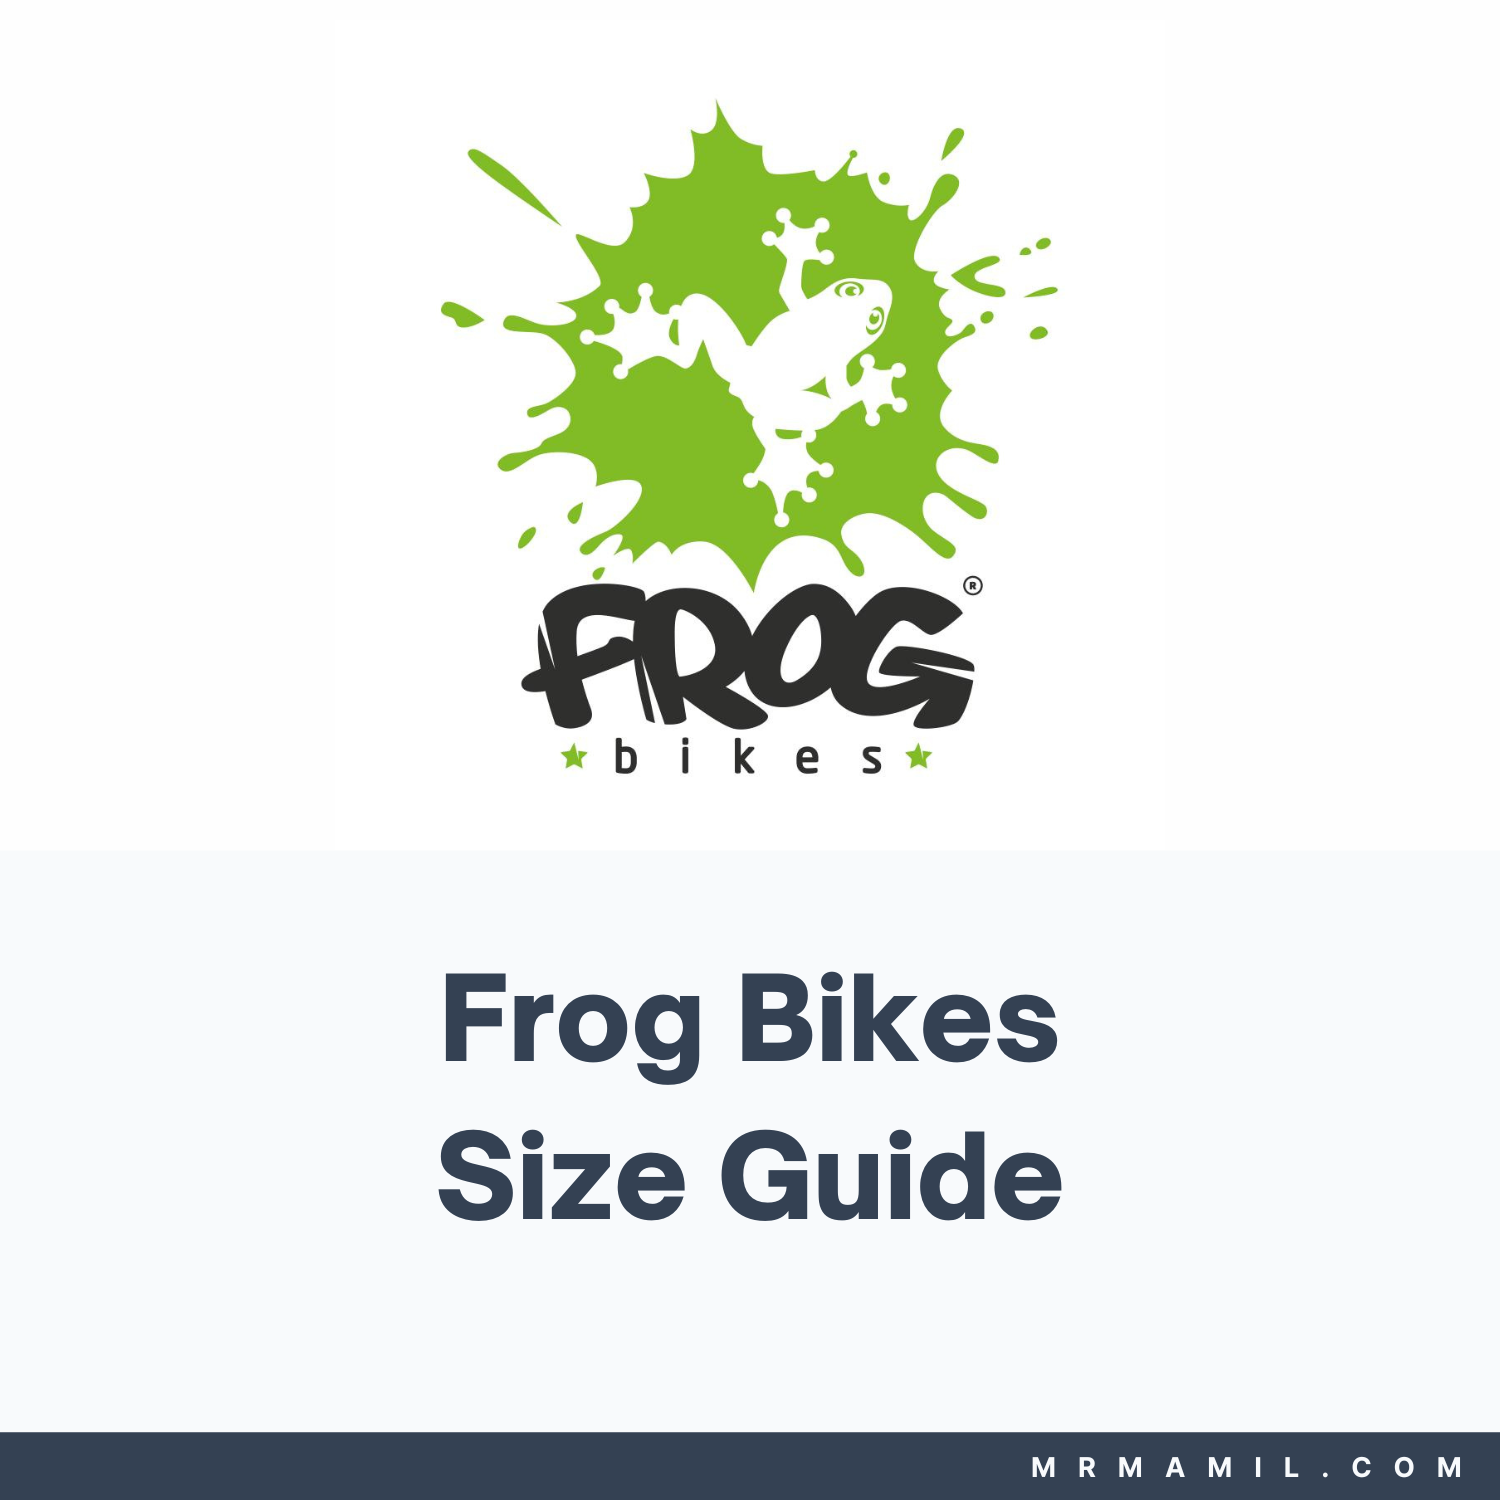 Frog Bikes Size Guide